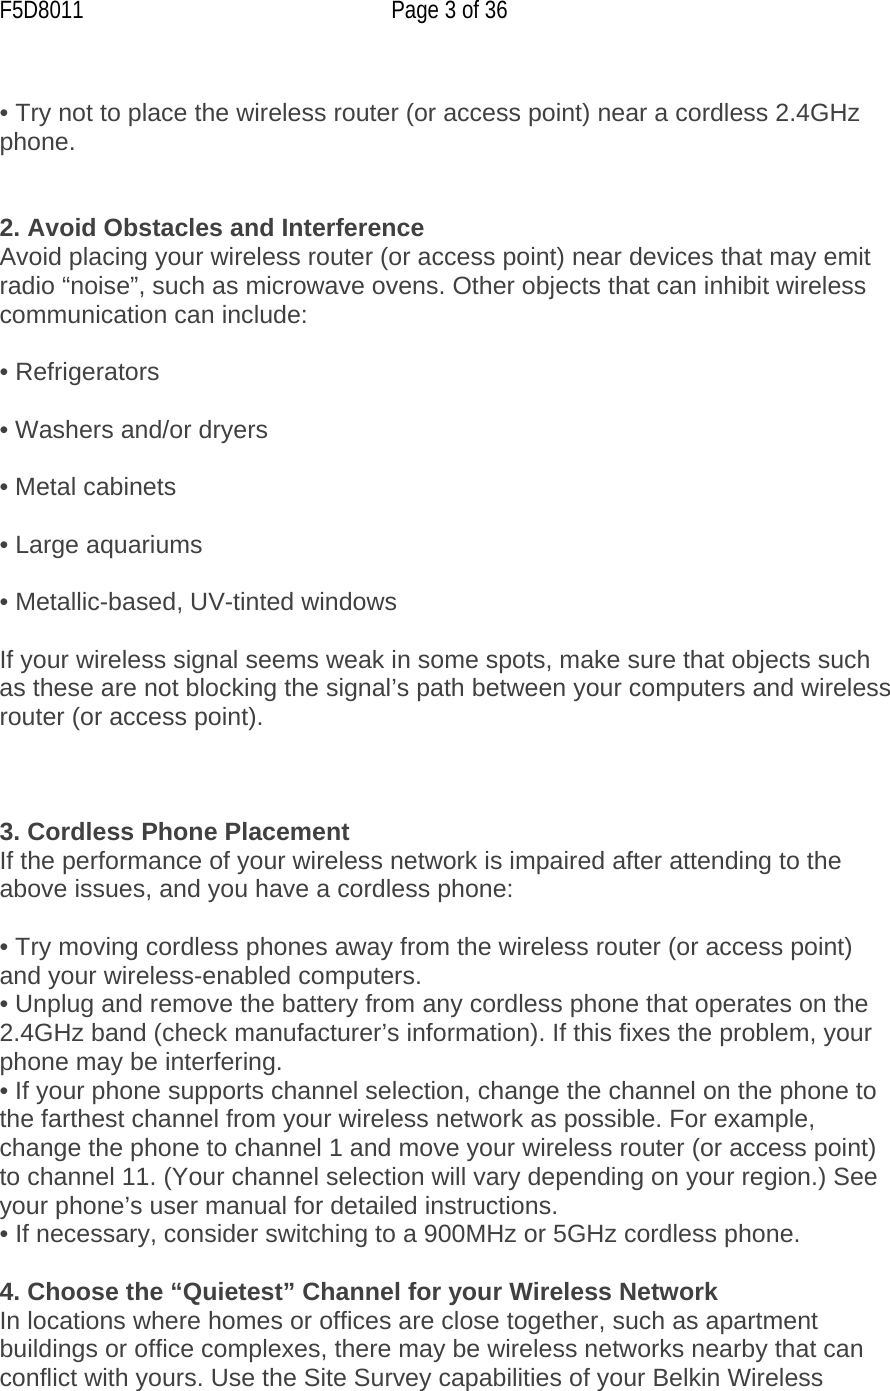 F5D8011  Page 3 of 36  • Try not to place the wireless router (or access point) near a cordless 2.4GHz phone.   2. Avoid Obstacles and Interference Avoid placing your wireless router (or access point) near devices that may emit radio “noise”, such as microwave ovens. Other objects that can inhibit wireless communication can include:  • Refrigerators  • Washers and/or dryers  • Metal cabinets  • Large aquariums  • Metallic-based, UV-tinted windows  If your wireless signal seems weak in some spots, make sure that objects such as these are not blocking the signal’s path between your computers and wireless router (or access point).    3. Cordless Phone Placement If the performance of your wireless network is impaired after attending to the above issues, and you have a cordless phone:  • Try moving cordless phones away from the wireless router (or access point) and your wireless-enabled computers. • Unplug and remove the battery from any cordless phone that operates on the 2.4GHz band (check manufacturer’s information). If this fixes the problem, your phone may be interfering. • If your phone supports channel selection, change the channel on the phone to the farthest channel from your wireless network as possible. For example, change the phone to channel 1 and move your wireless router (or access point) to channel 11. (Your channel selection will vary depending on your region.) See your phone’s user manual for detailed instructions. • If necessary, consider switching to a 900MHz or 5GHz cordless phone.  4. Choose the “Quietest” Channel for your Wireless Network In locations where homes or offices are close together, such as apartment buildings or office complexes, there may be wireless networks nearby that can conflict with yours. Use the Site Survey capabilities of your Belkin Wireless 